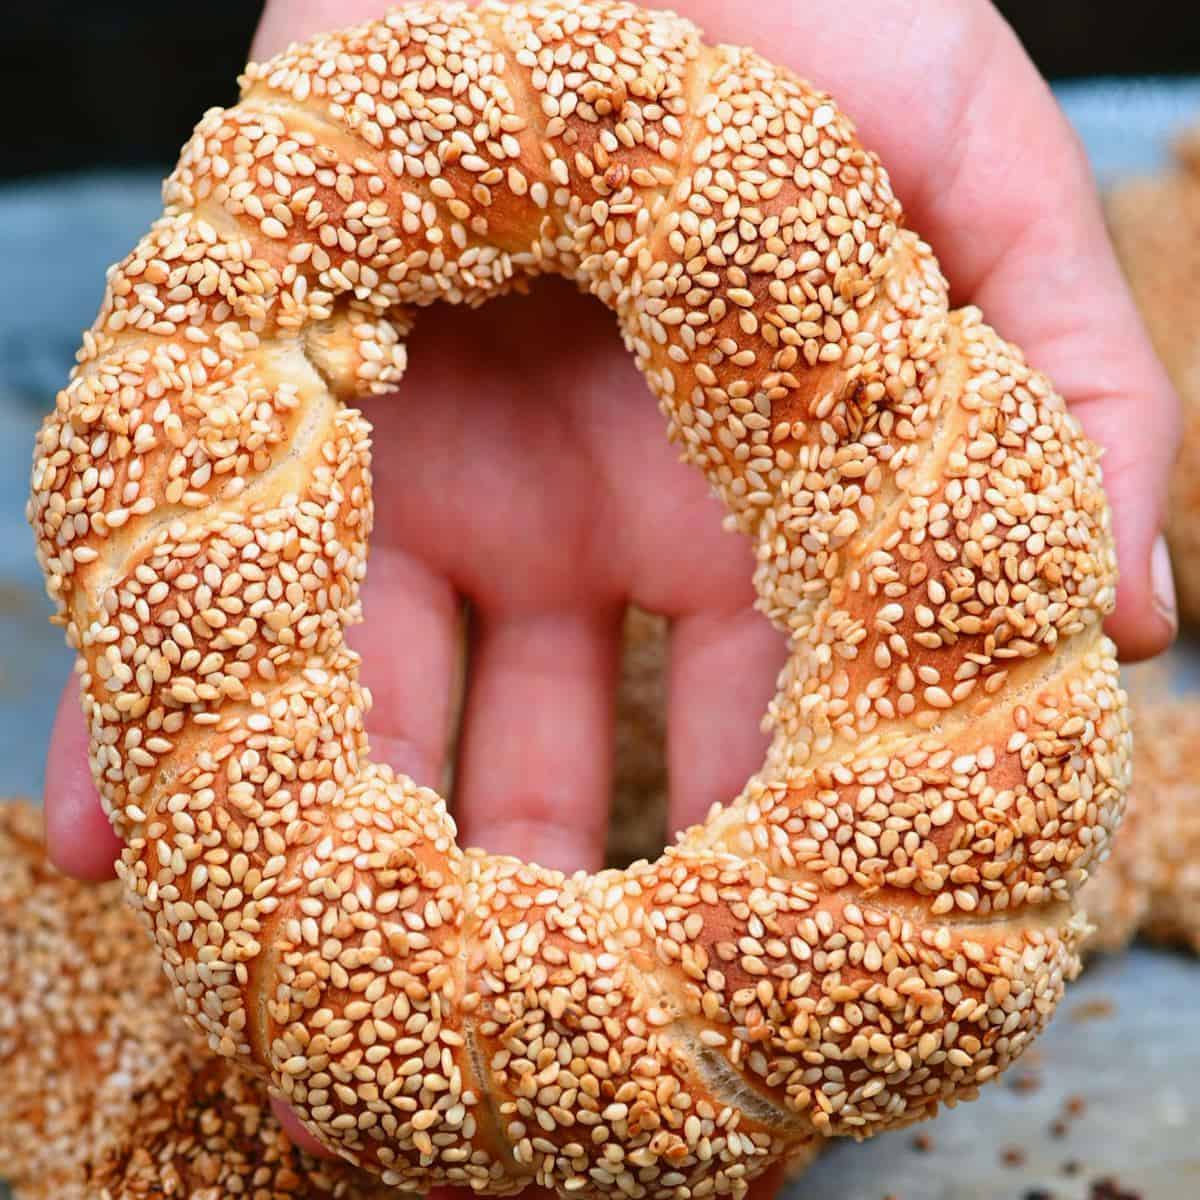 A hand holding a baked simit